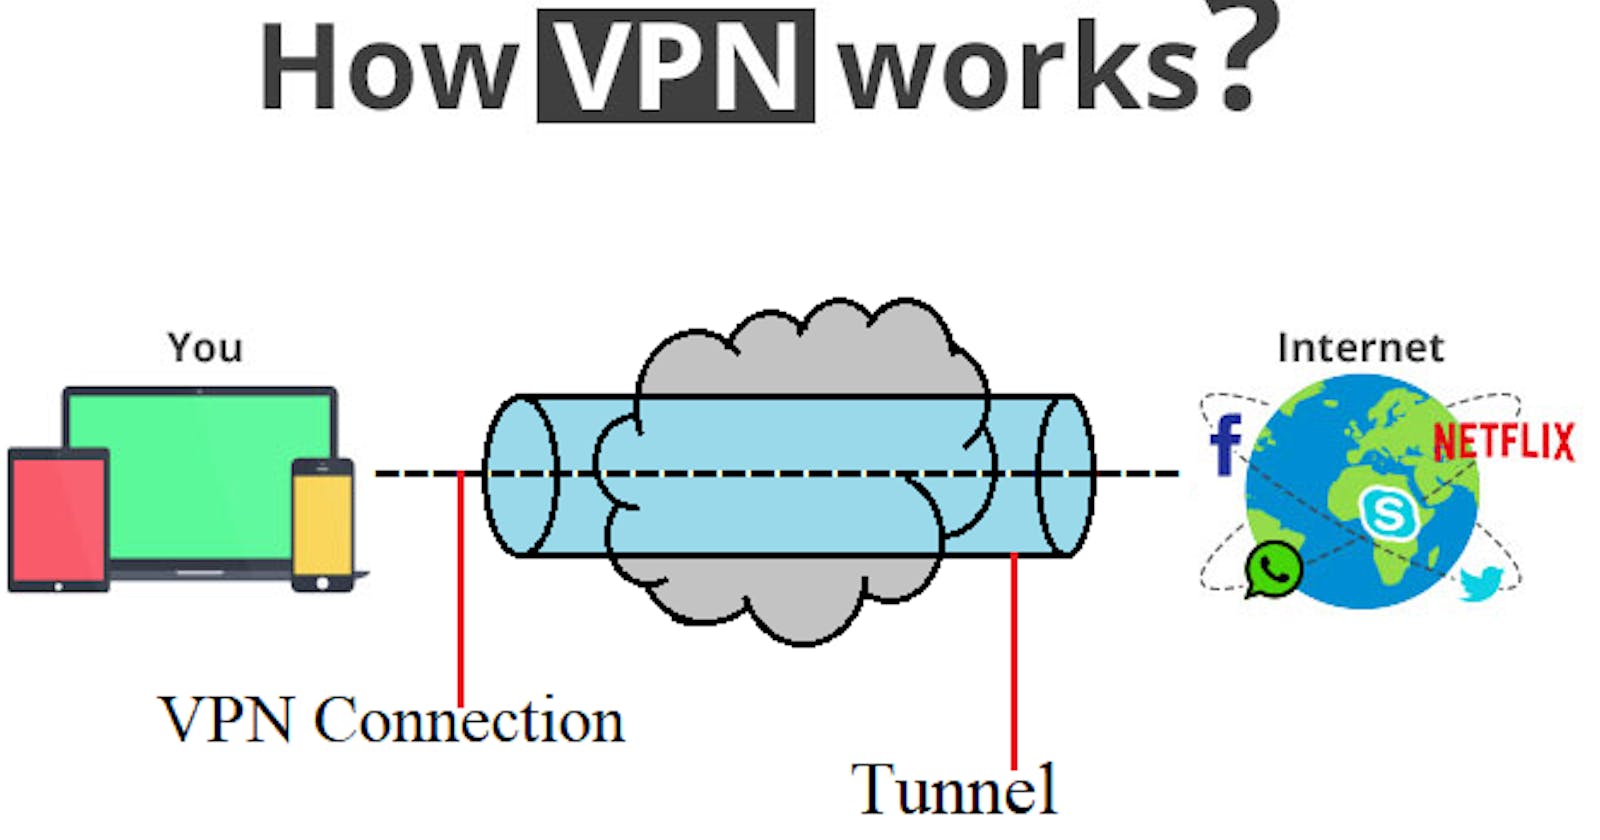 What is VPN - Types and Working of VPN